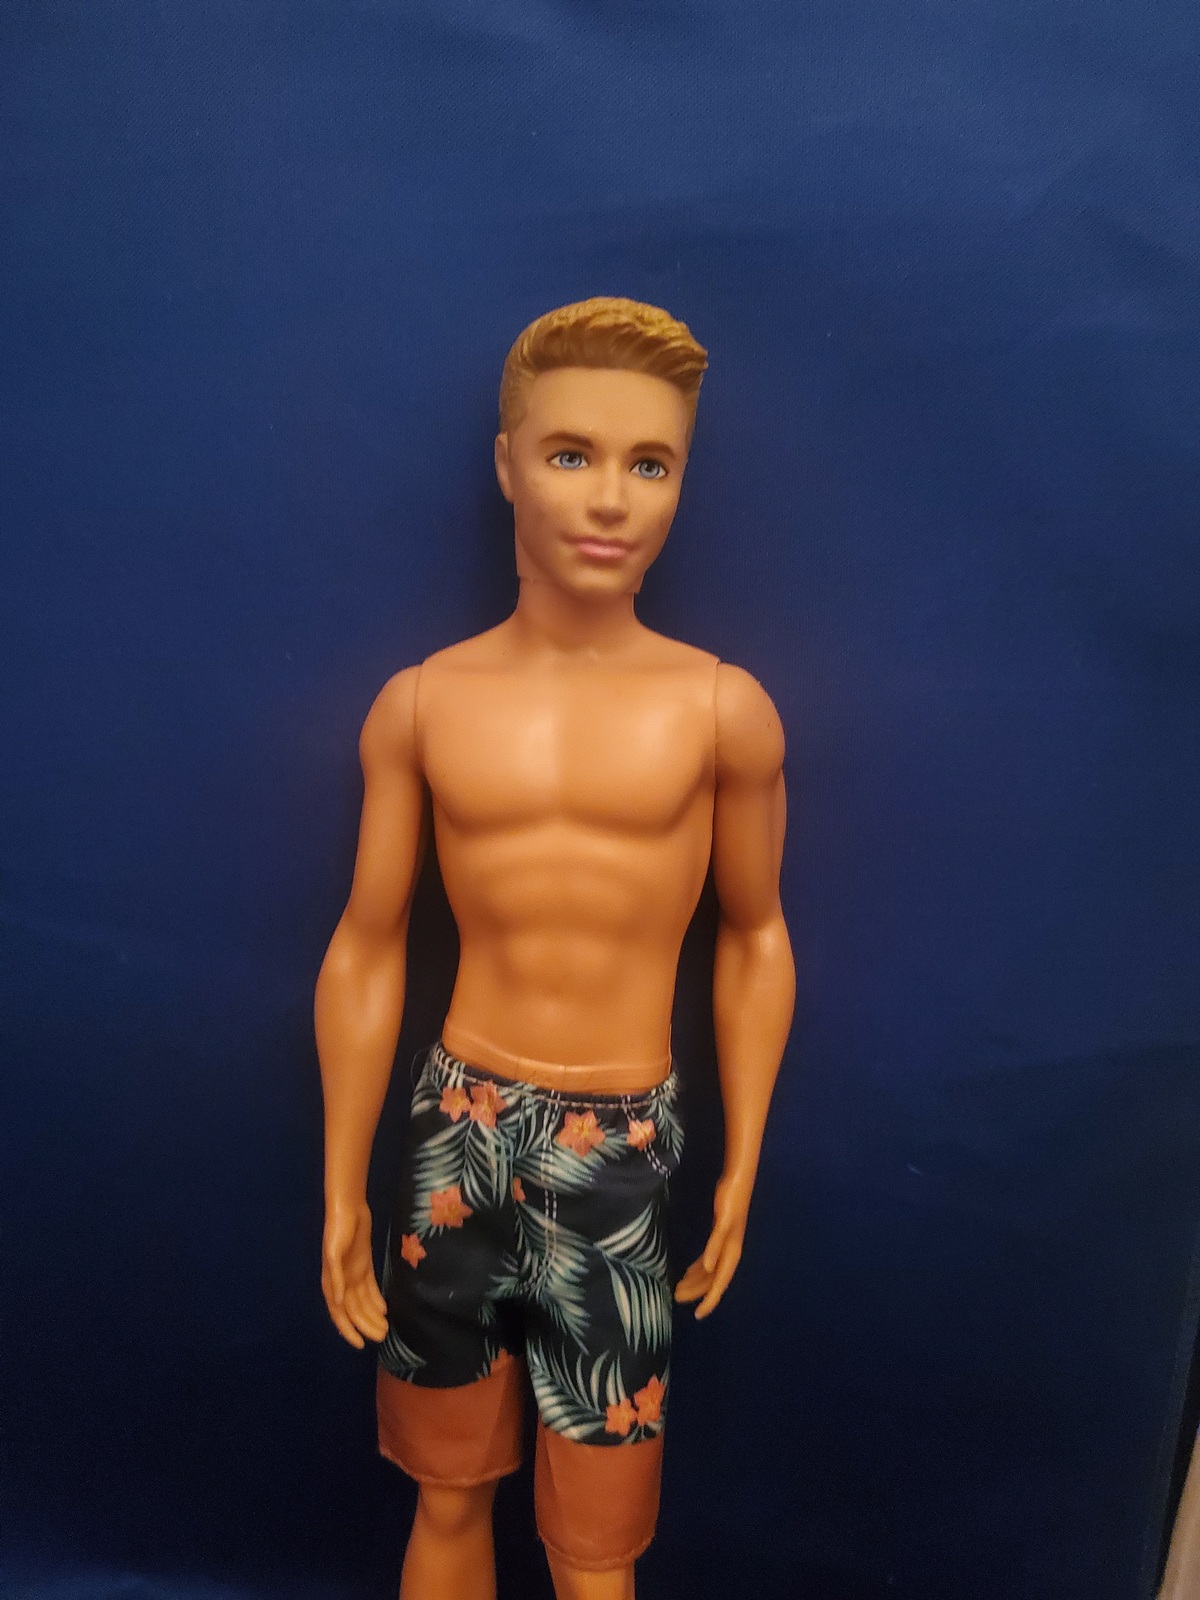 Ken Doll with Swim Trunks and Beach Accessories